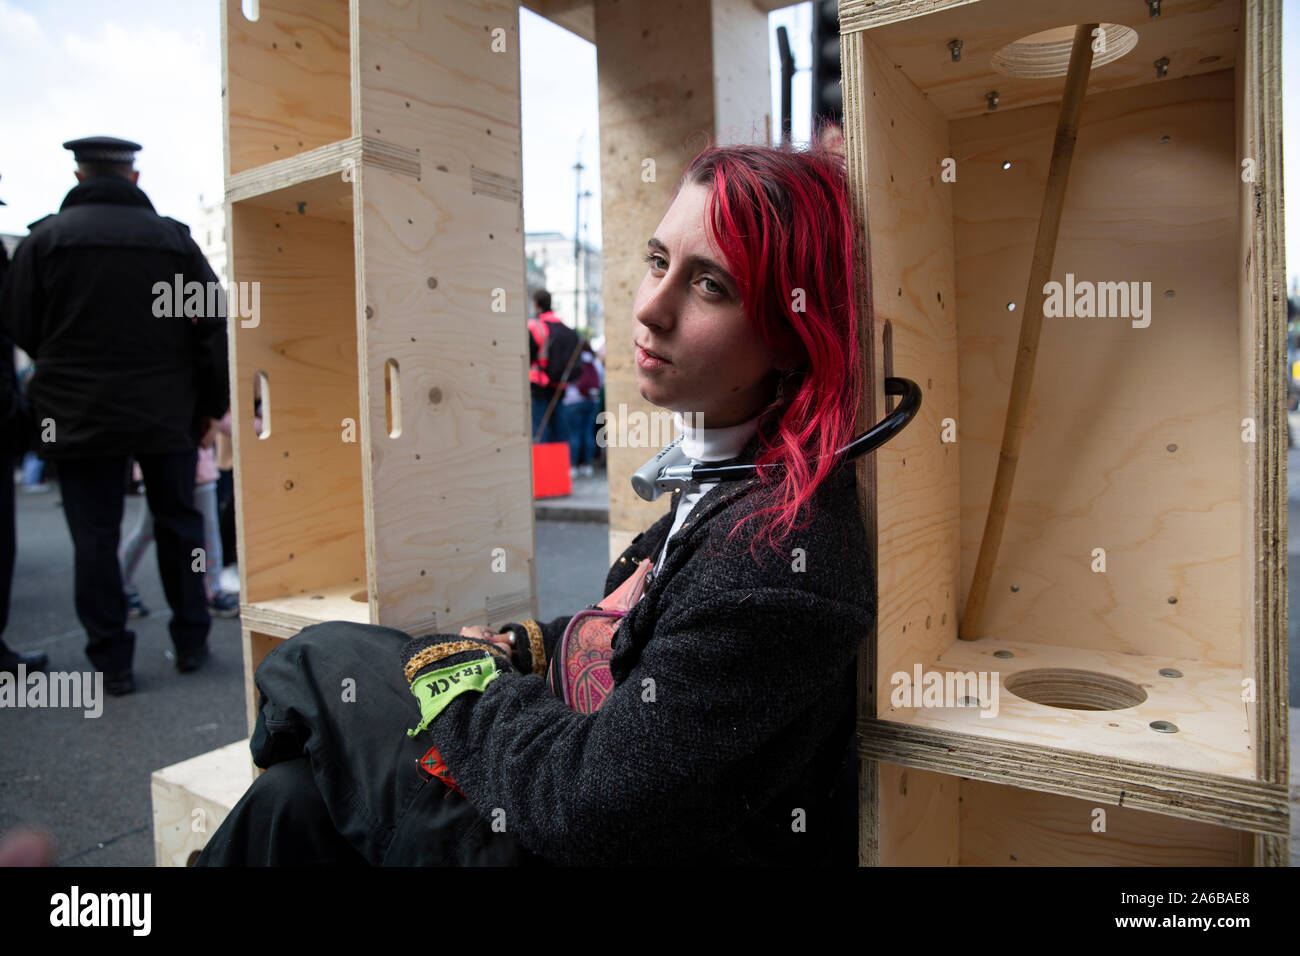 London, 10th October 2019, Extinction Rebellion demonstrator has locked herself to a timber structure occupying part of the road beside Trafalgar Square, awaiting arrest. Stock Photo